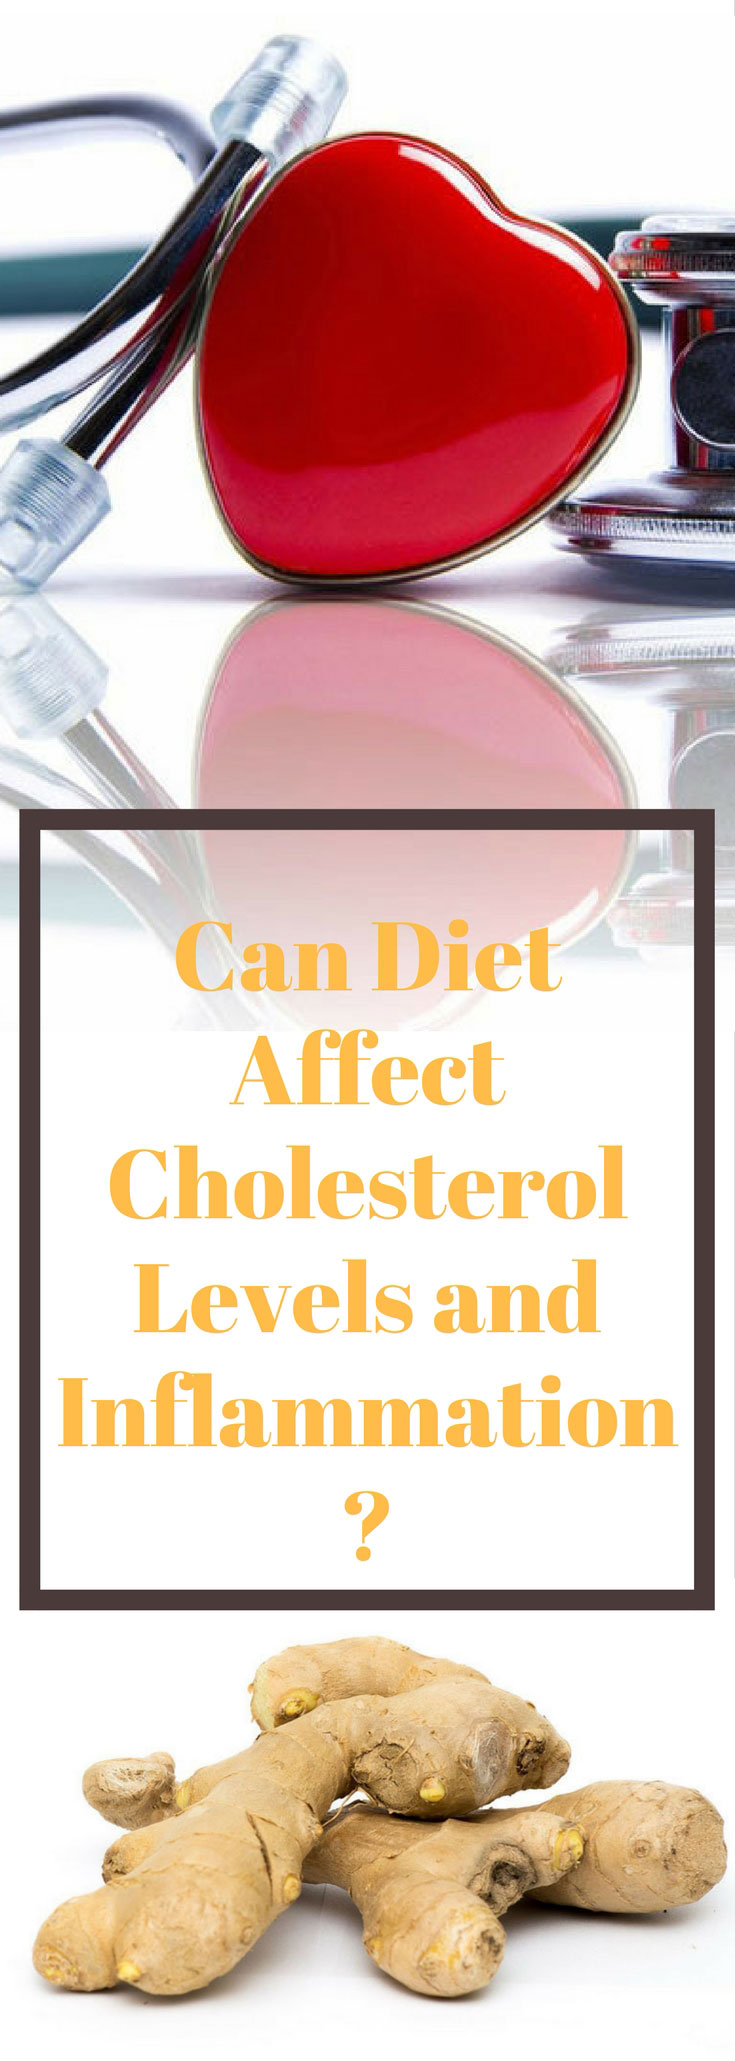 Can Diet Affect Cholesterol Levels and Inflammation?